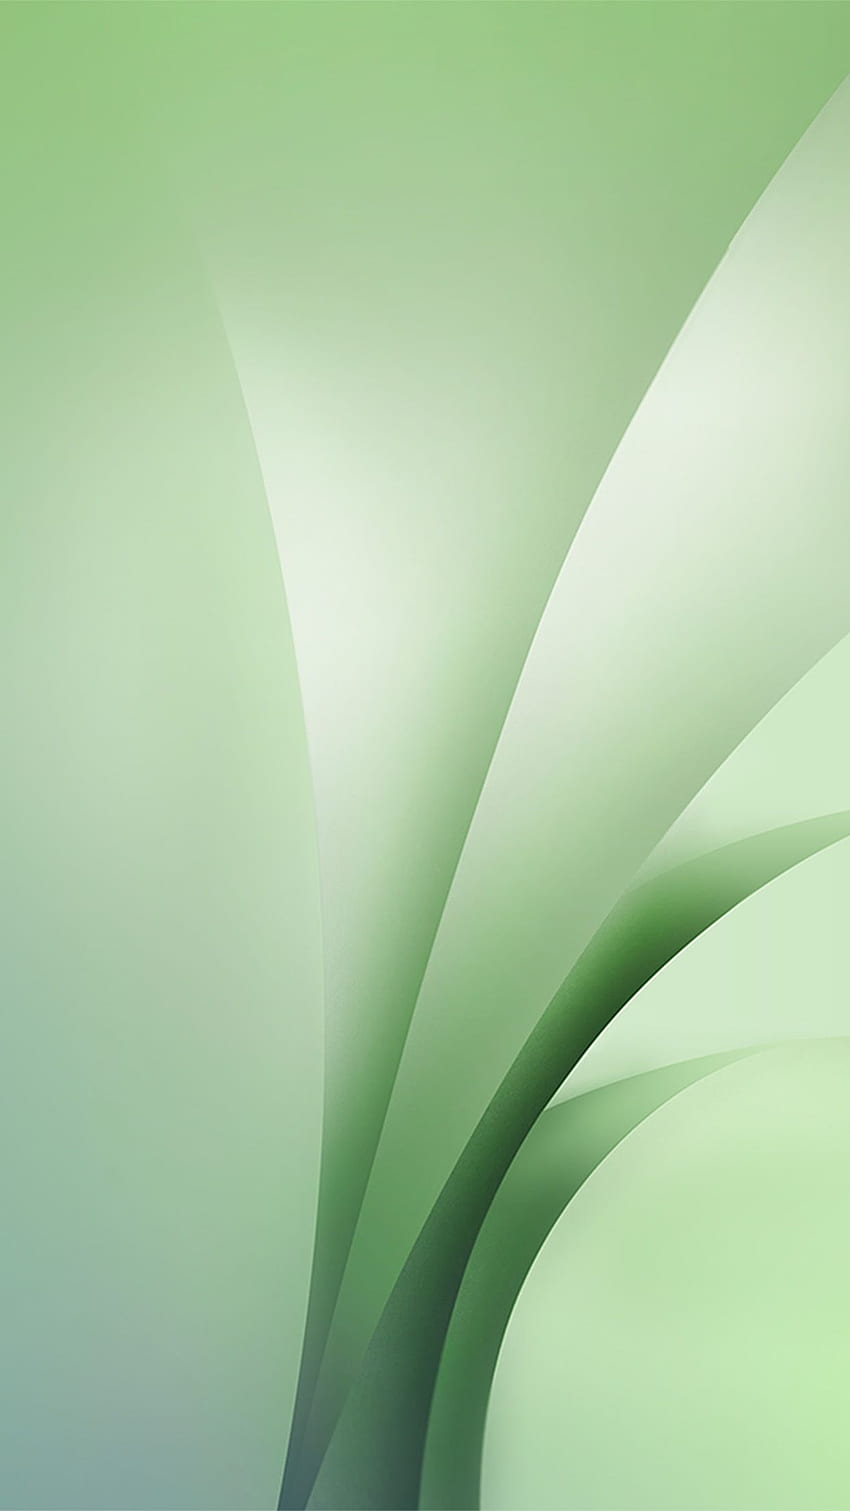 Samsung Galaxy Abstract Green Pattern Android - Android за Samsung, абстрактна зелена природа HD тапет за телефон